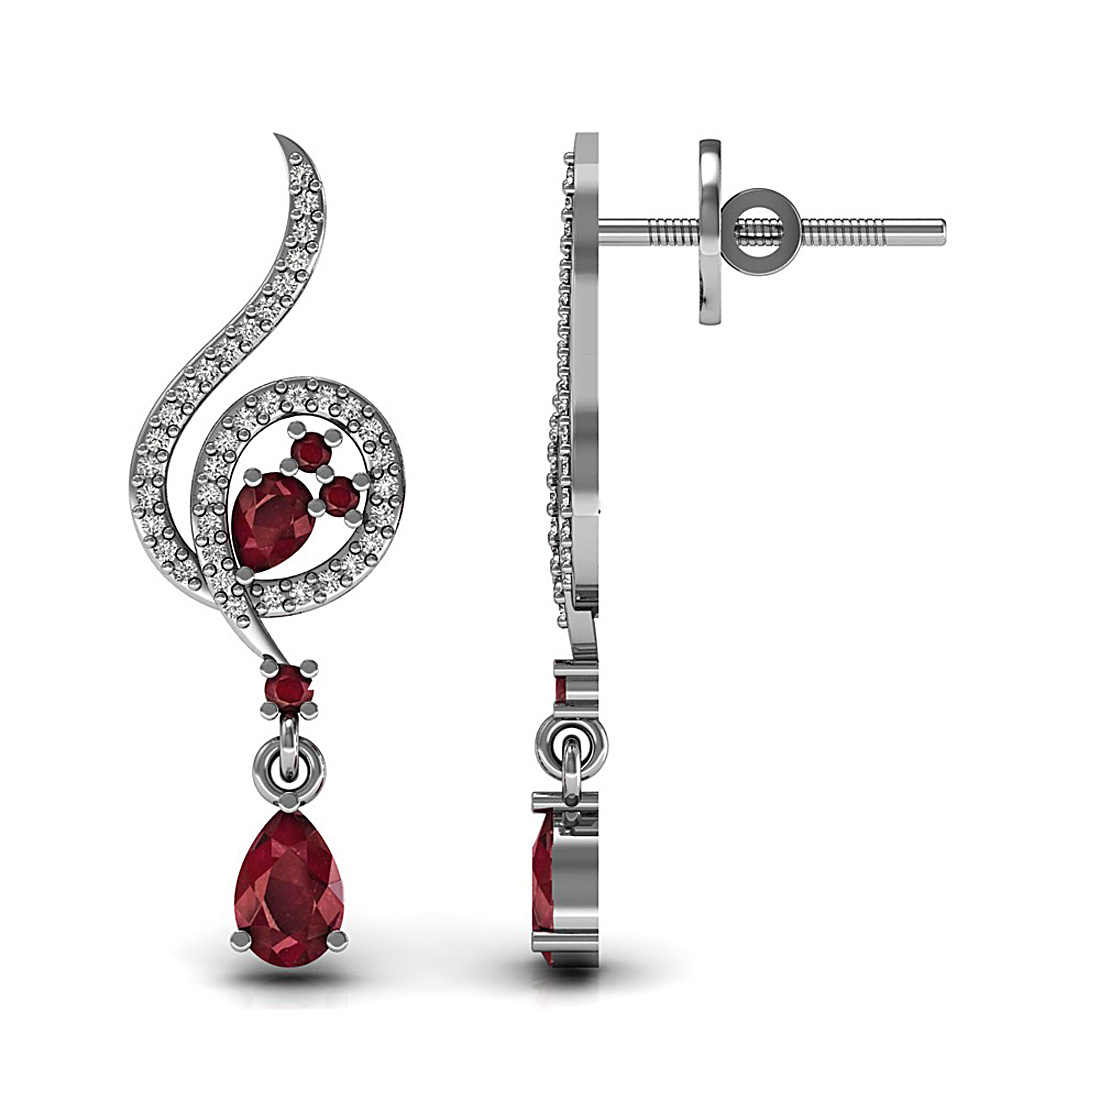 This beautiful pair of drop earrings made in 18k solid white gold and studded with natural ruby gemstone.